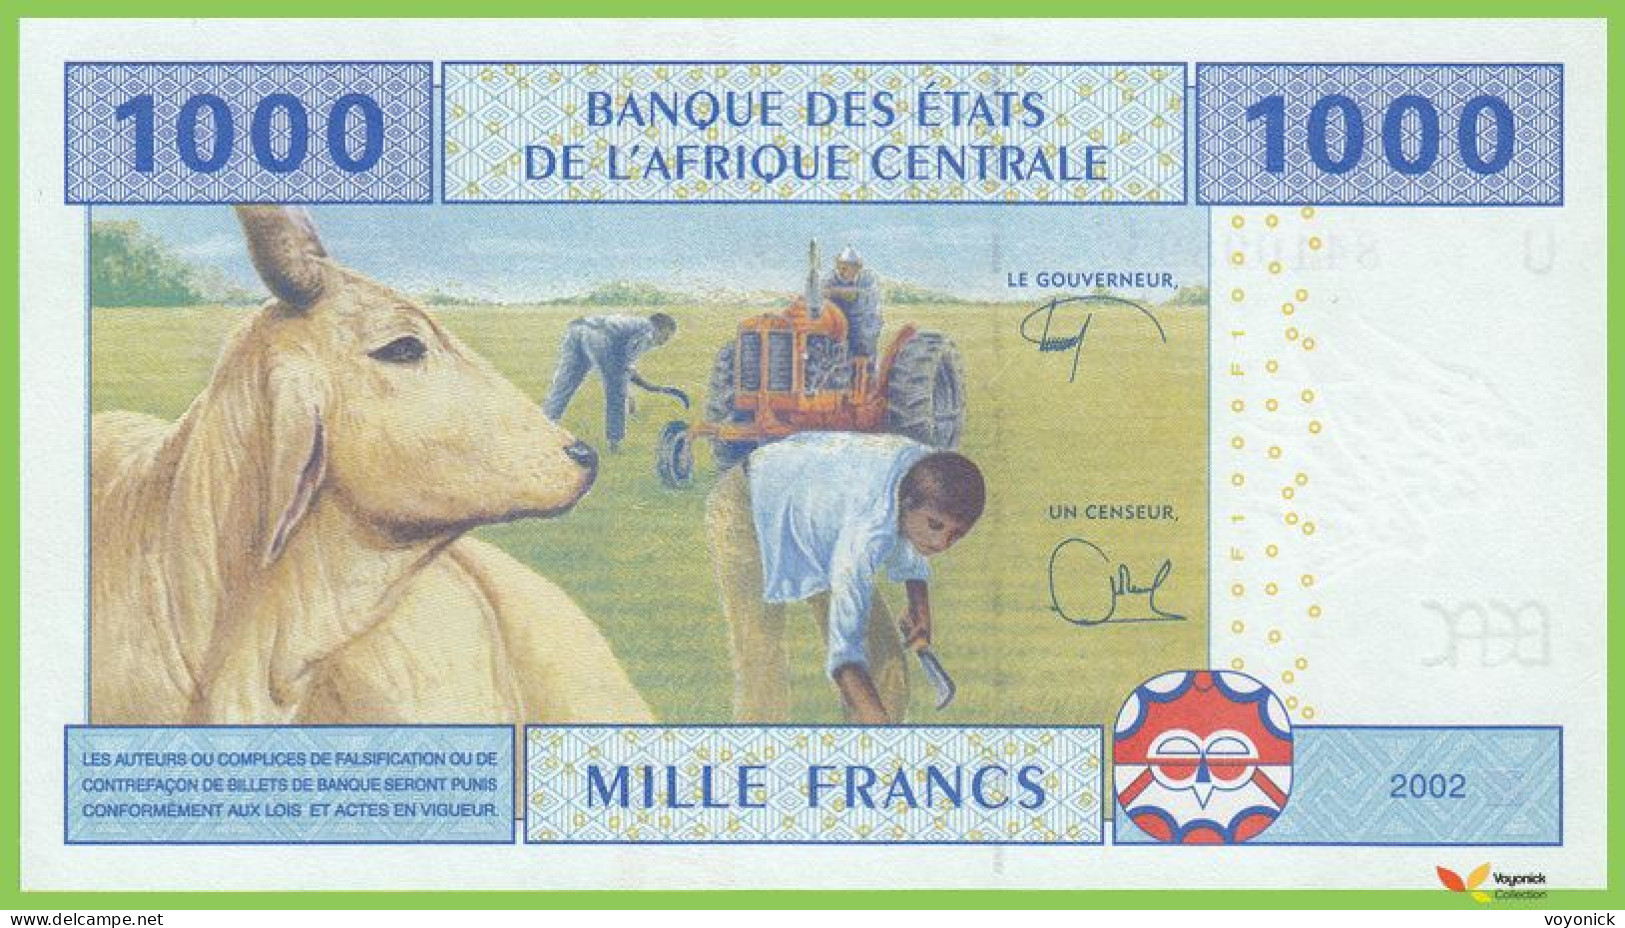 Voyo CENTRAL AFRICAN STATES CAMEROON 1000 Francs 2002(2017) P207Ue B107Uf U UNC - Central African States